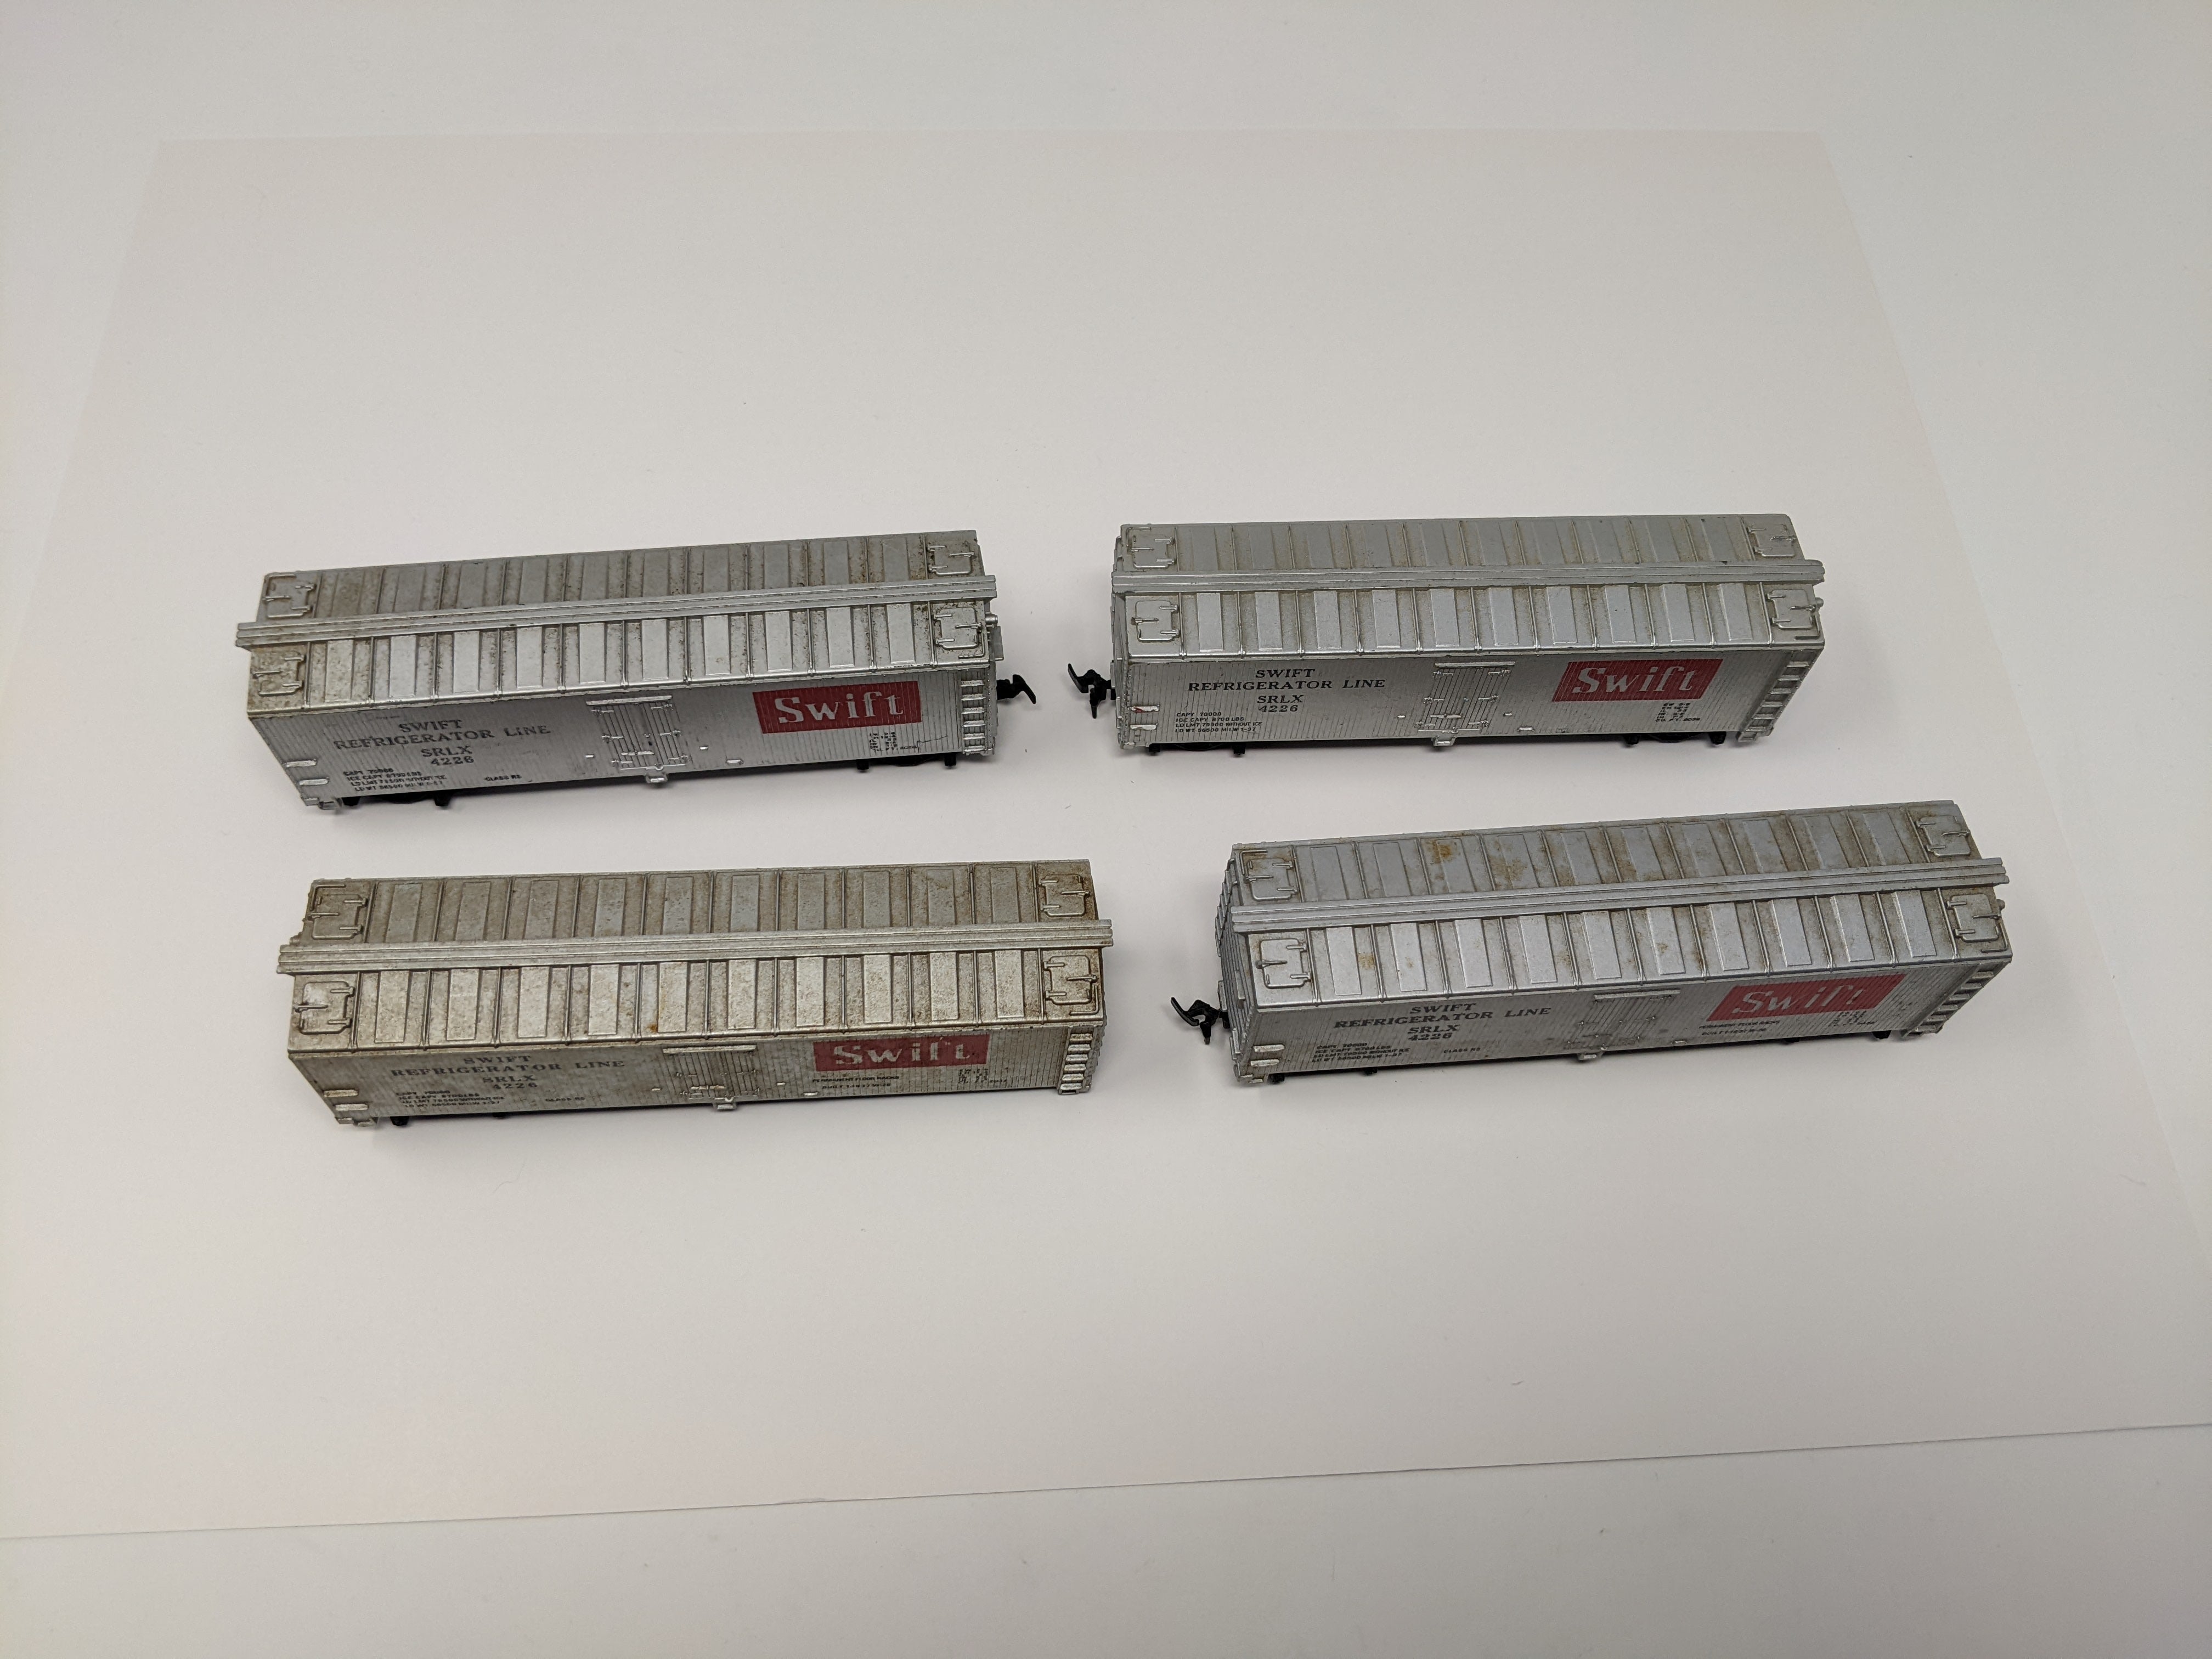 USED HO Scale, Lot of 4 Wooden Box Cars (various brands), Swift Refrigerator Line SRLX #4226, Read Description